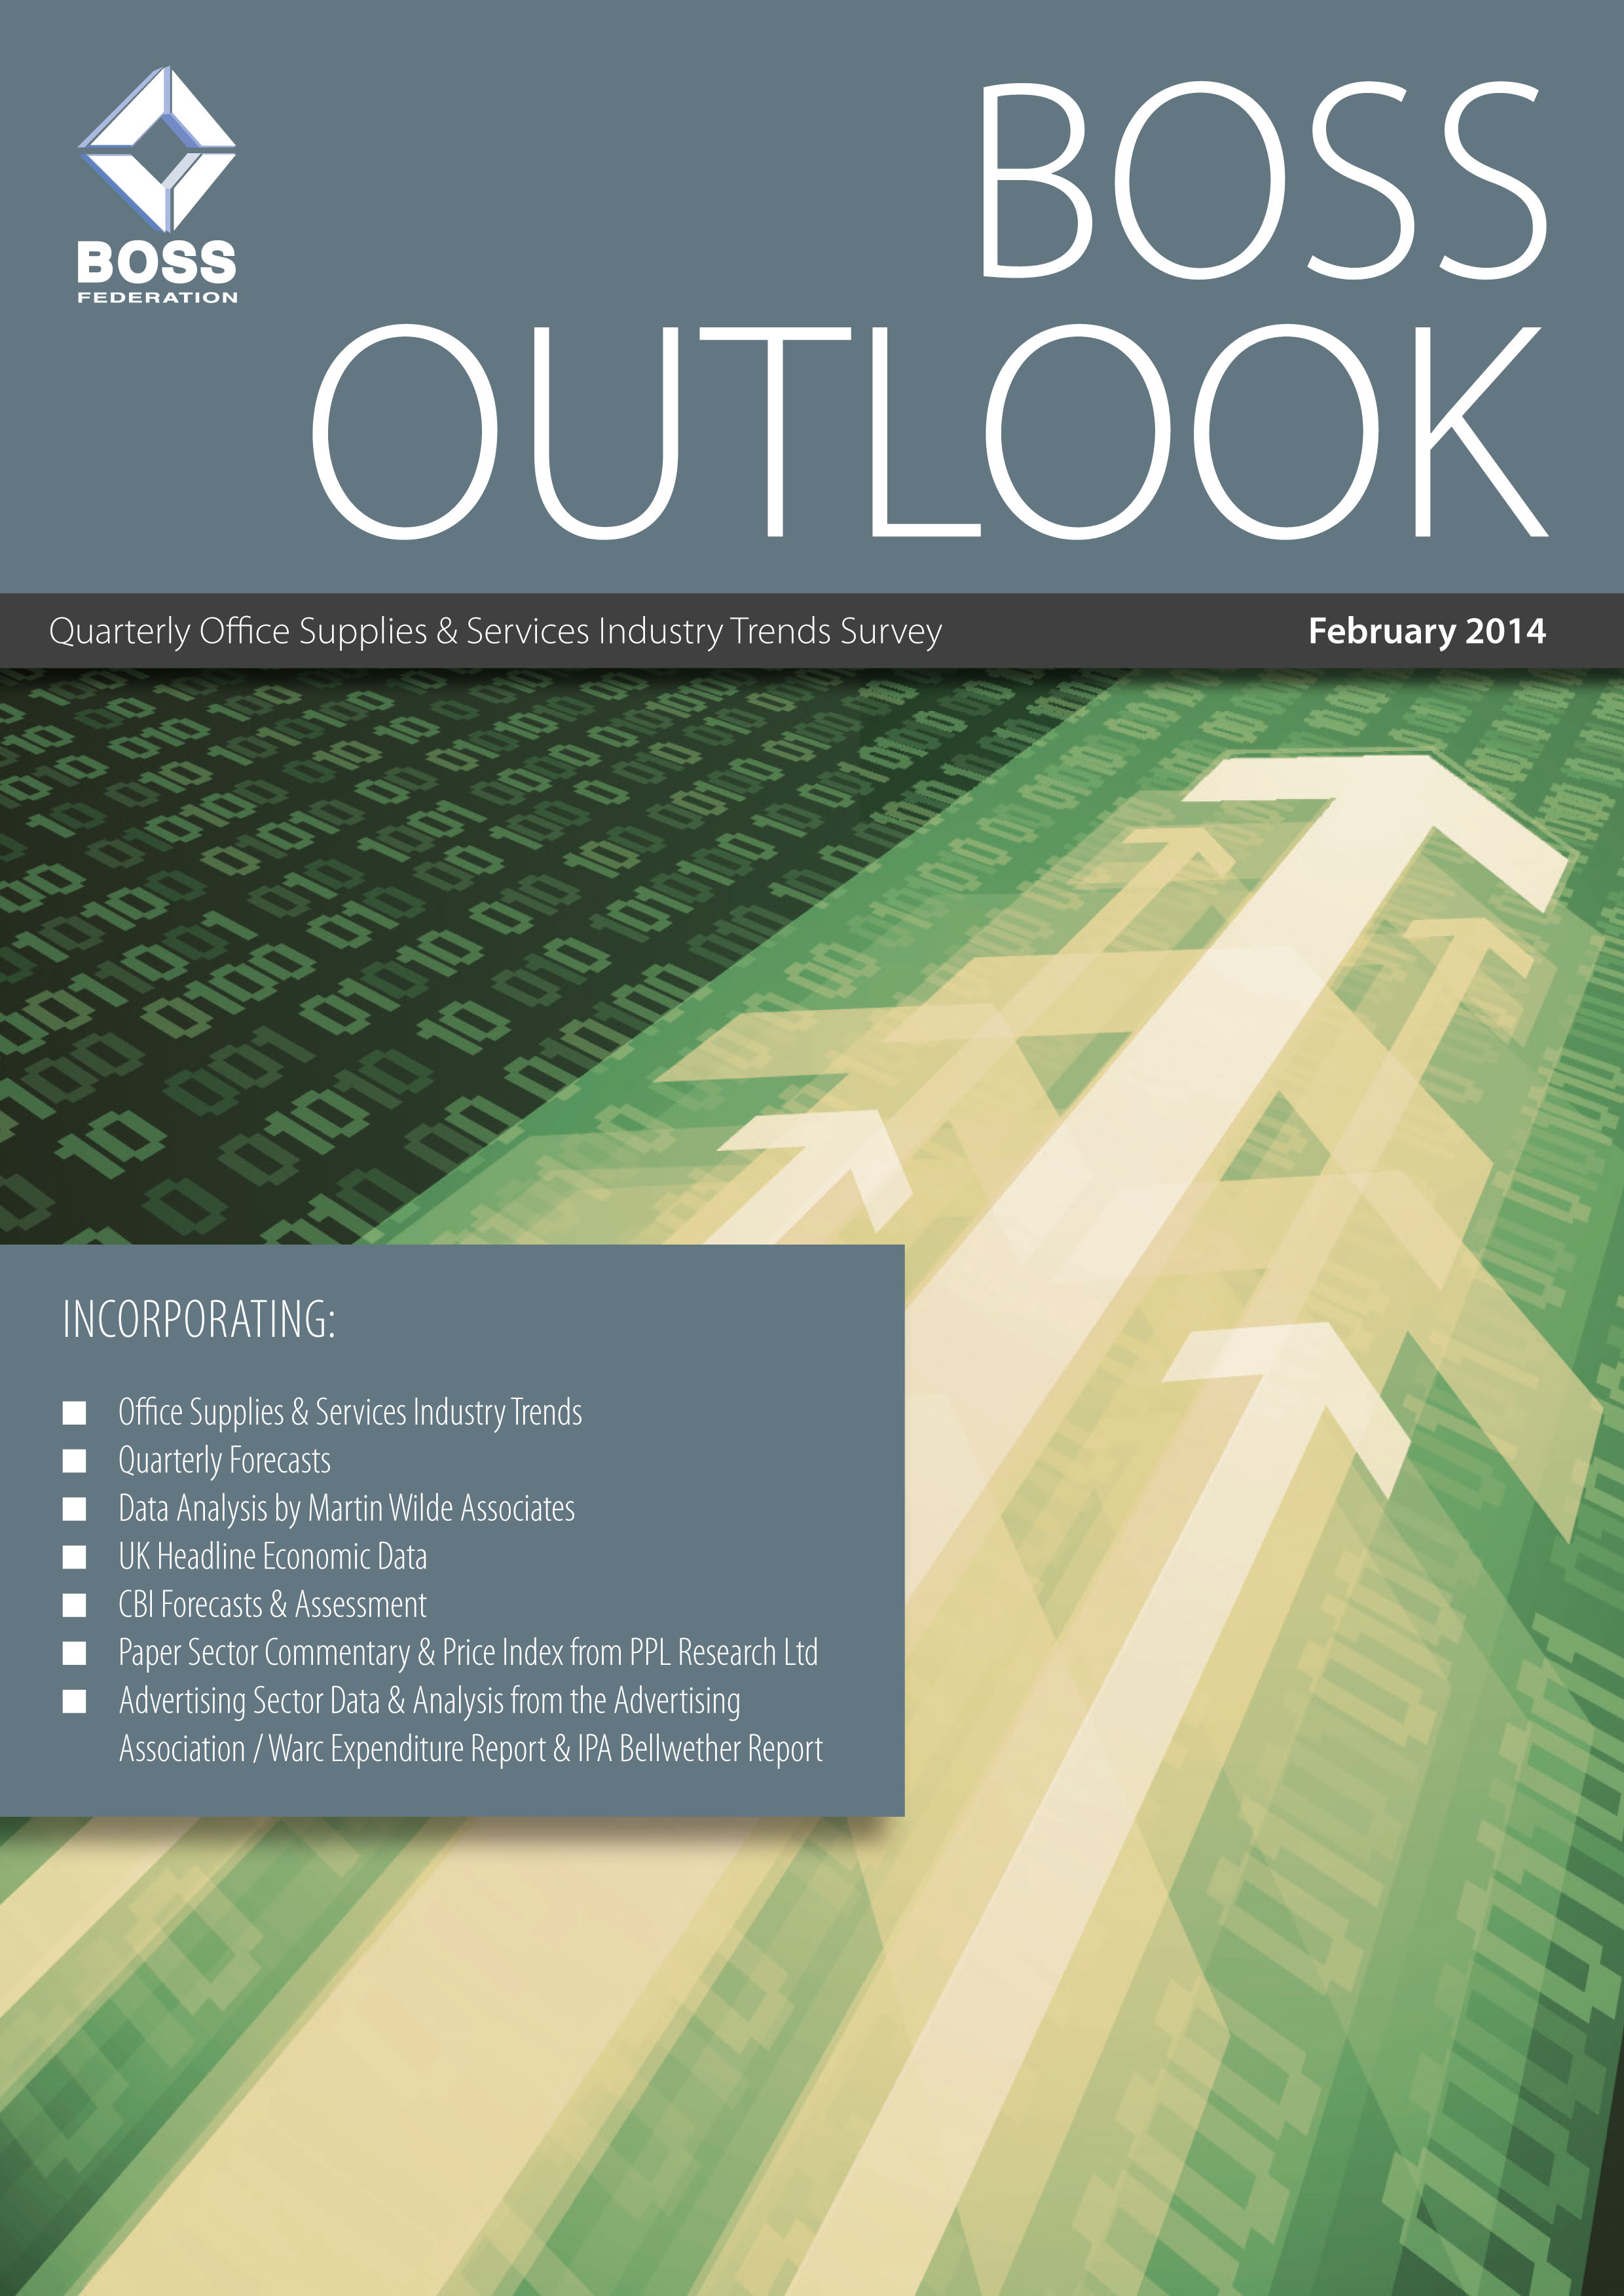 BOSS Outlook - The latest state of trade report is available now!